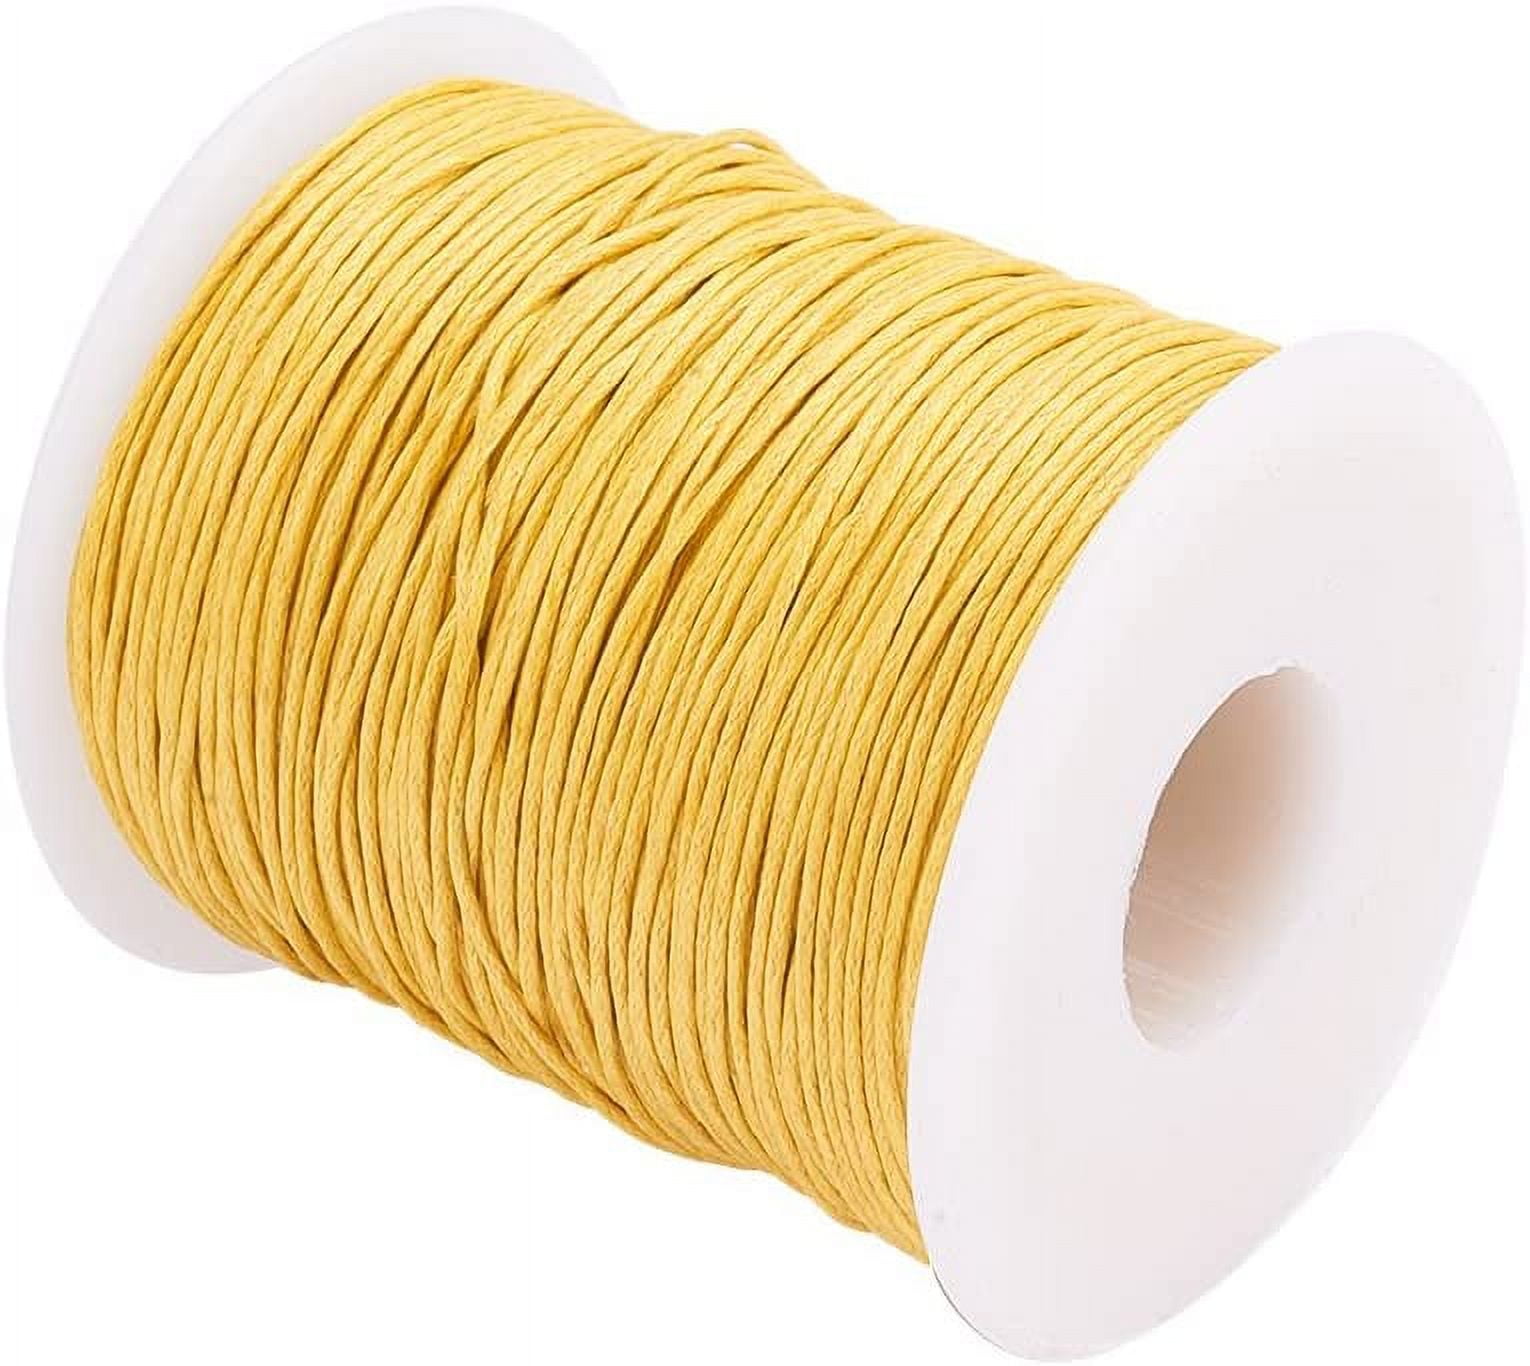 1 Roll 1mm 100 Yards Waxed Cotton Cord Thread Beading String for Jewelry  Making Crafting Beading Macrame Golden 